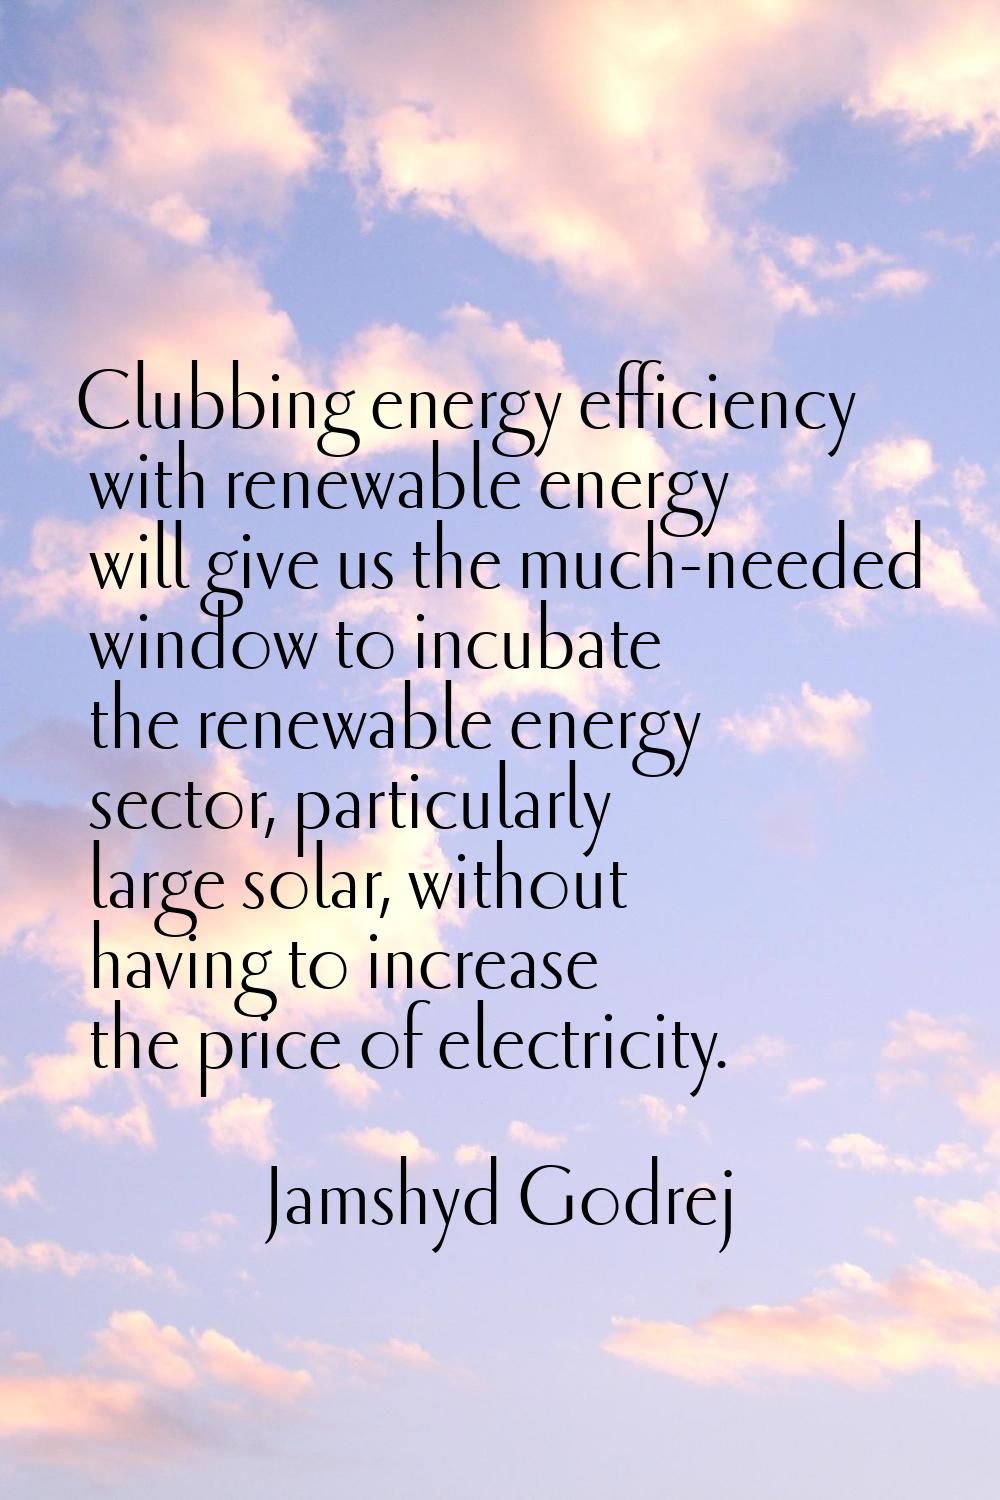 Clubbing energy efficiency with renewable energy will give us the much-needed window to incubate th